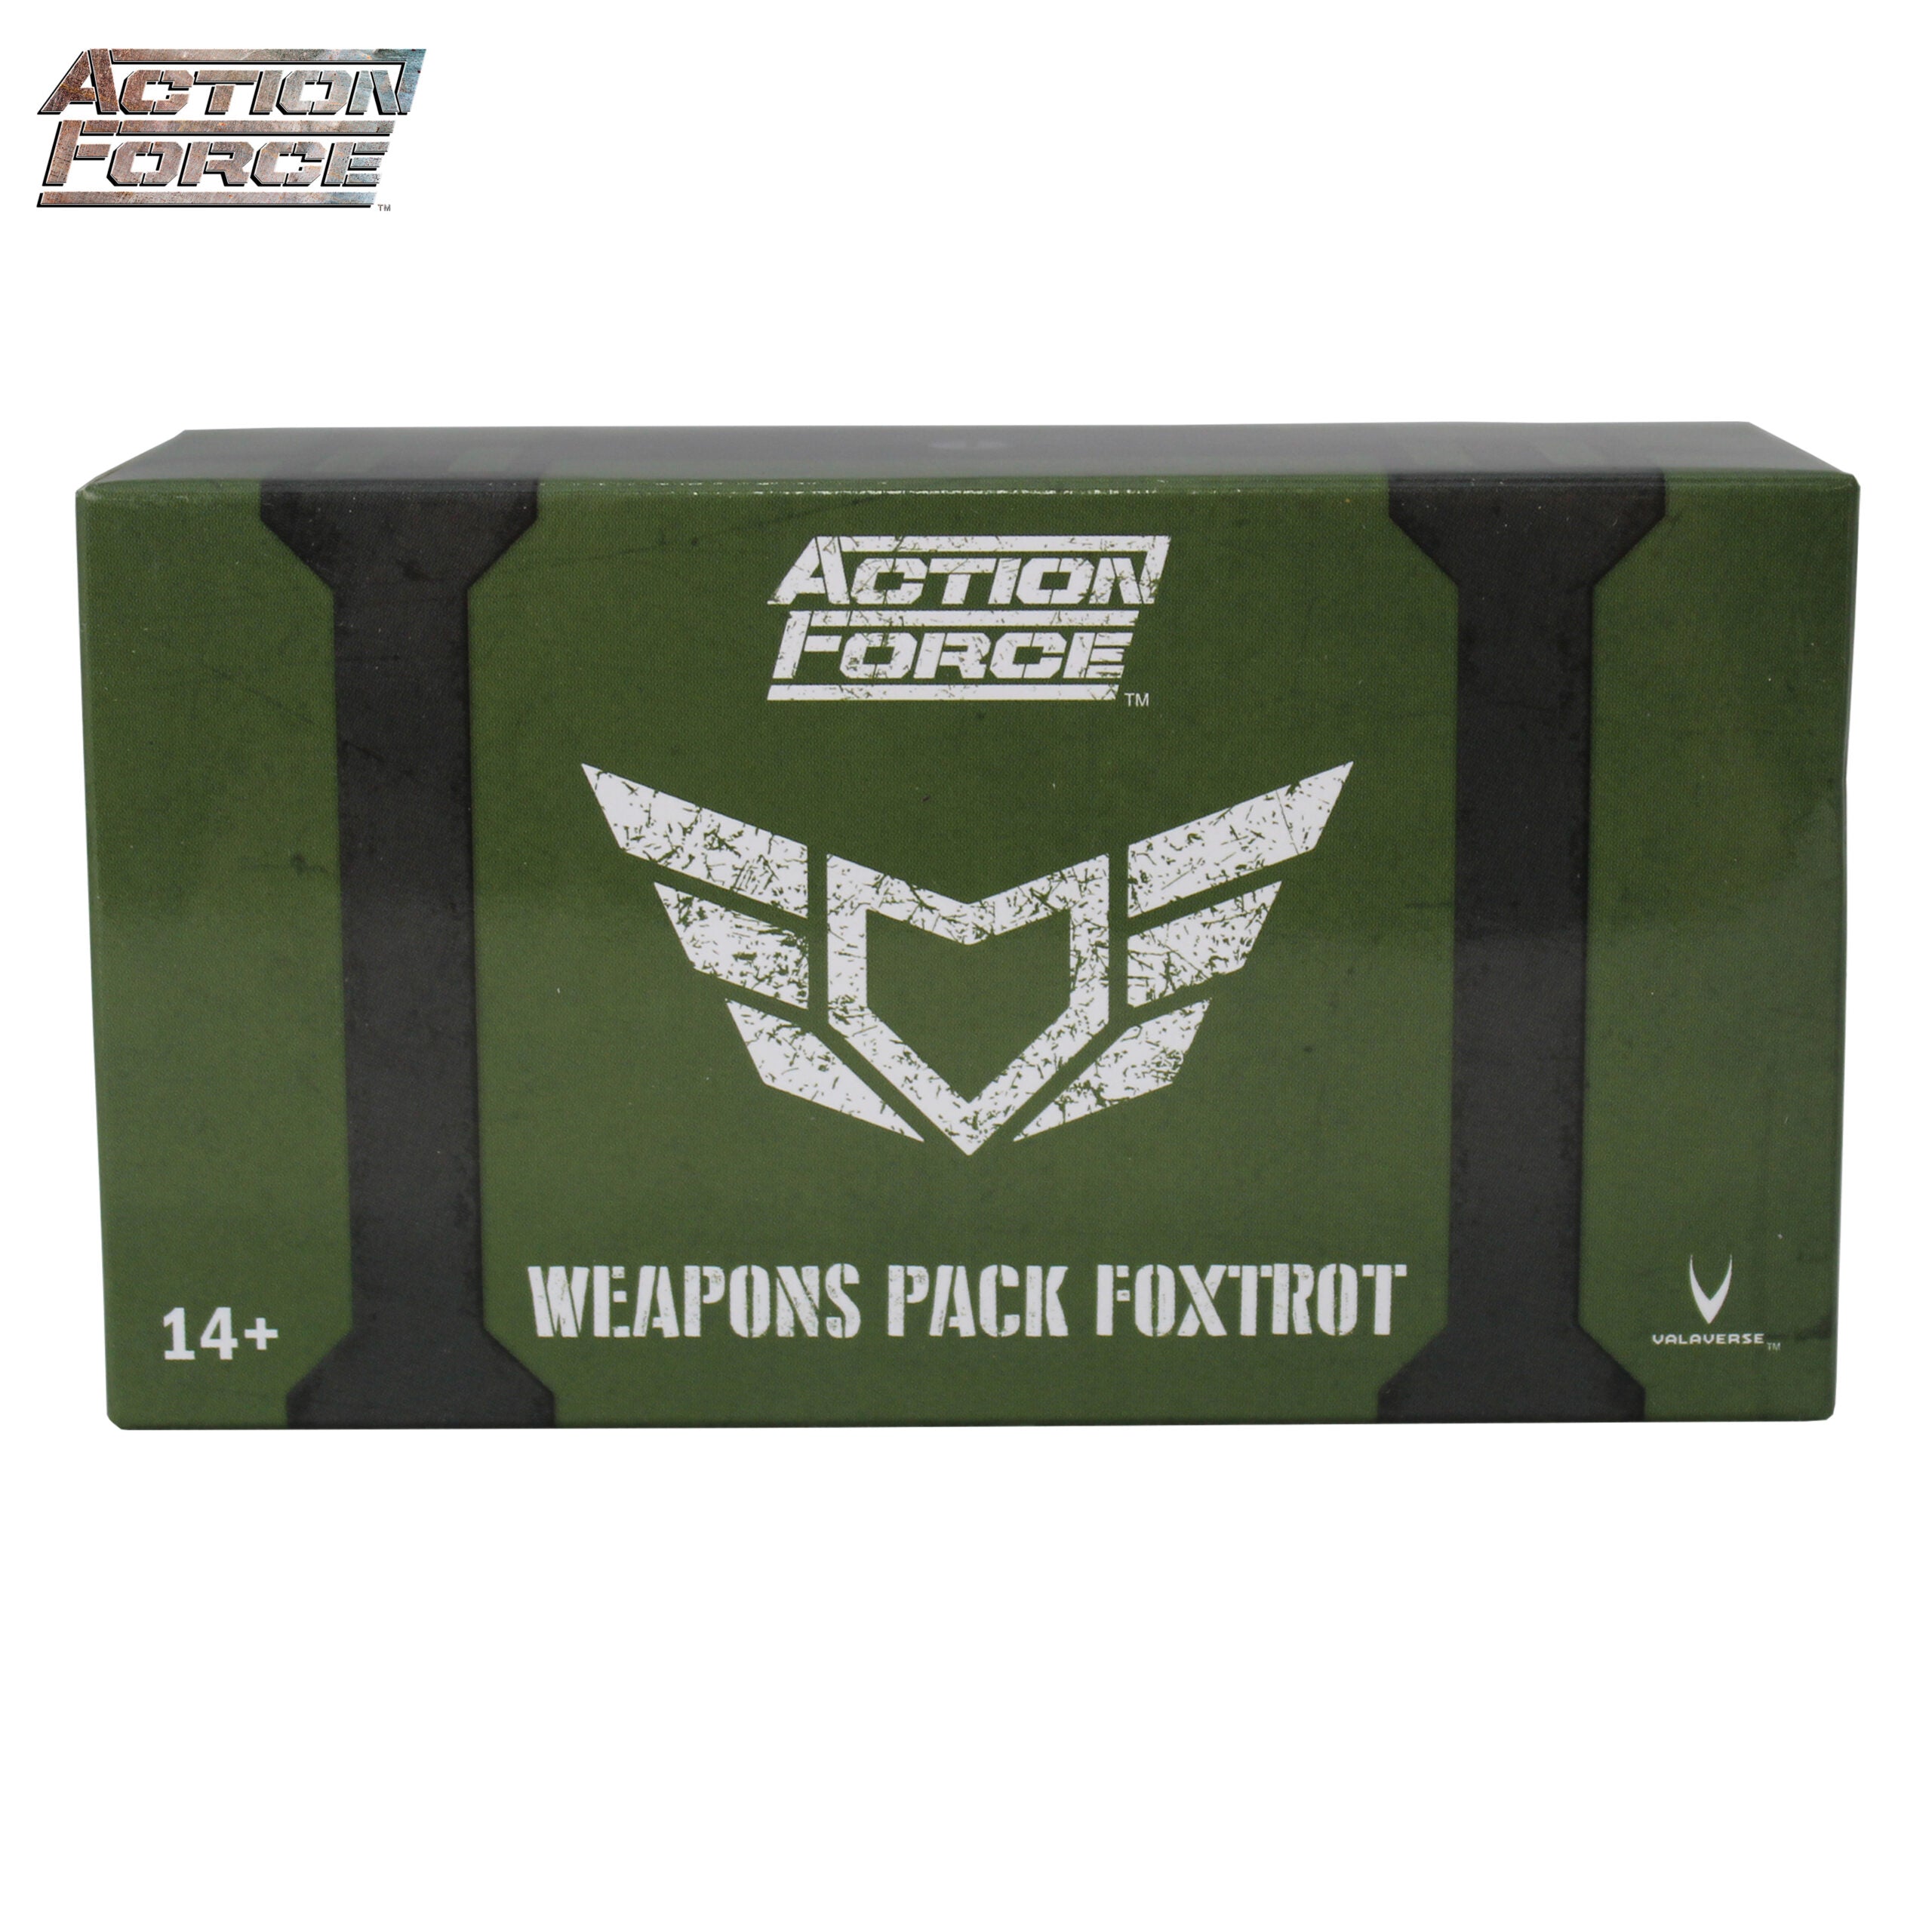 Weapons Pack Foxtrot